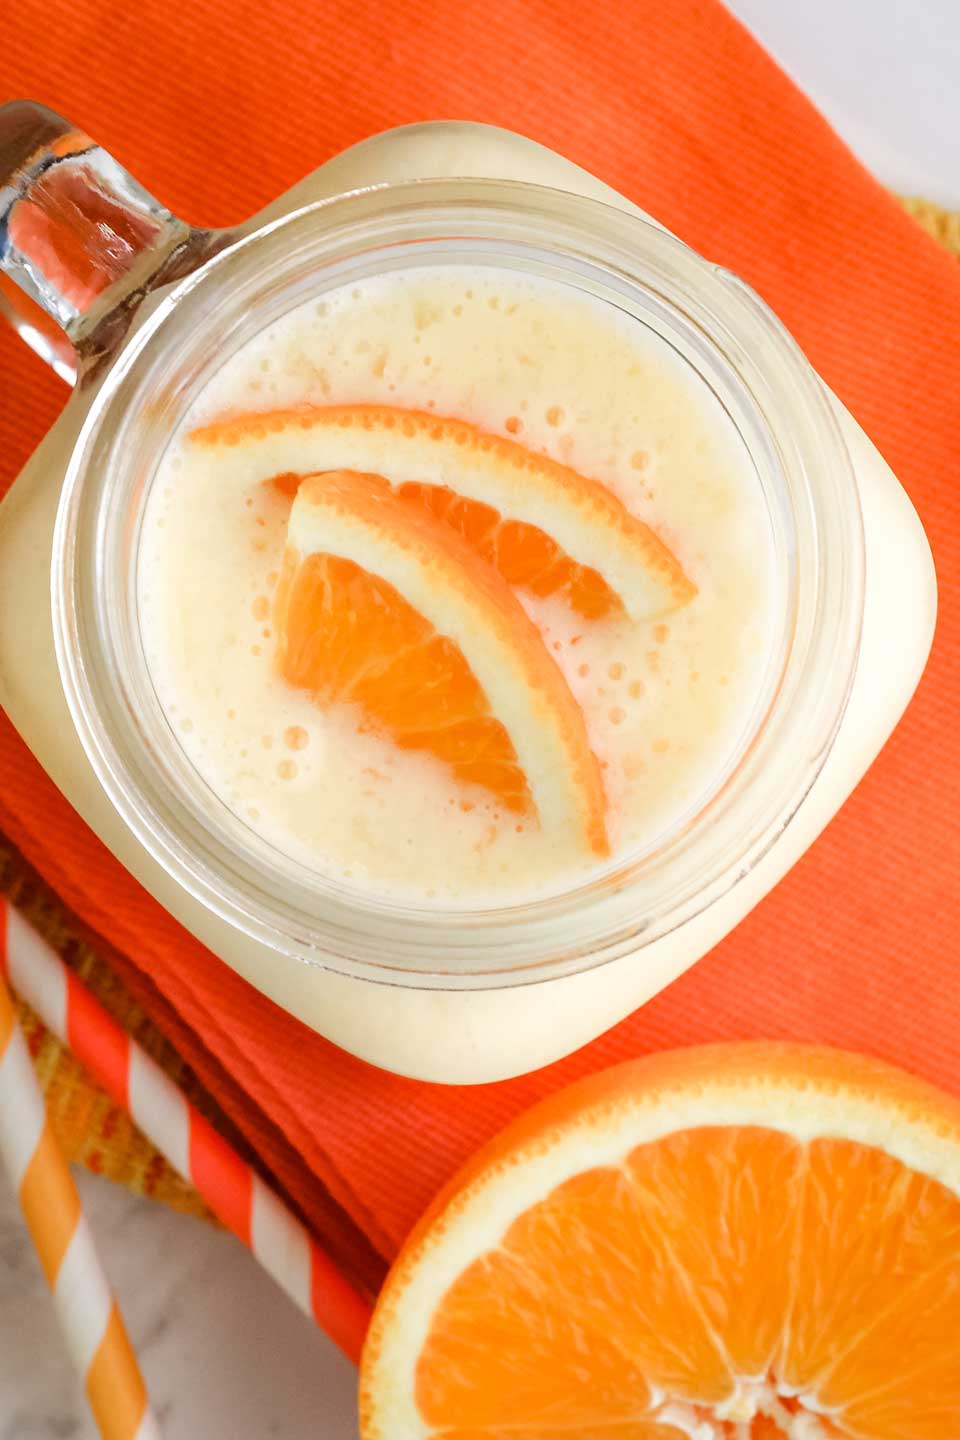 Top view of finished smoothie, with two sliced and quartered oranges floating on top.